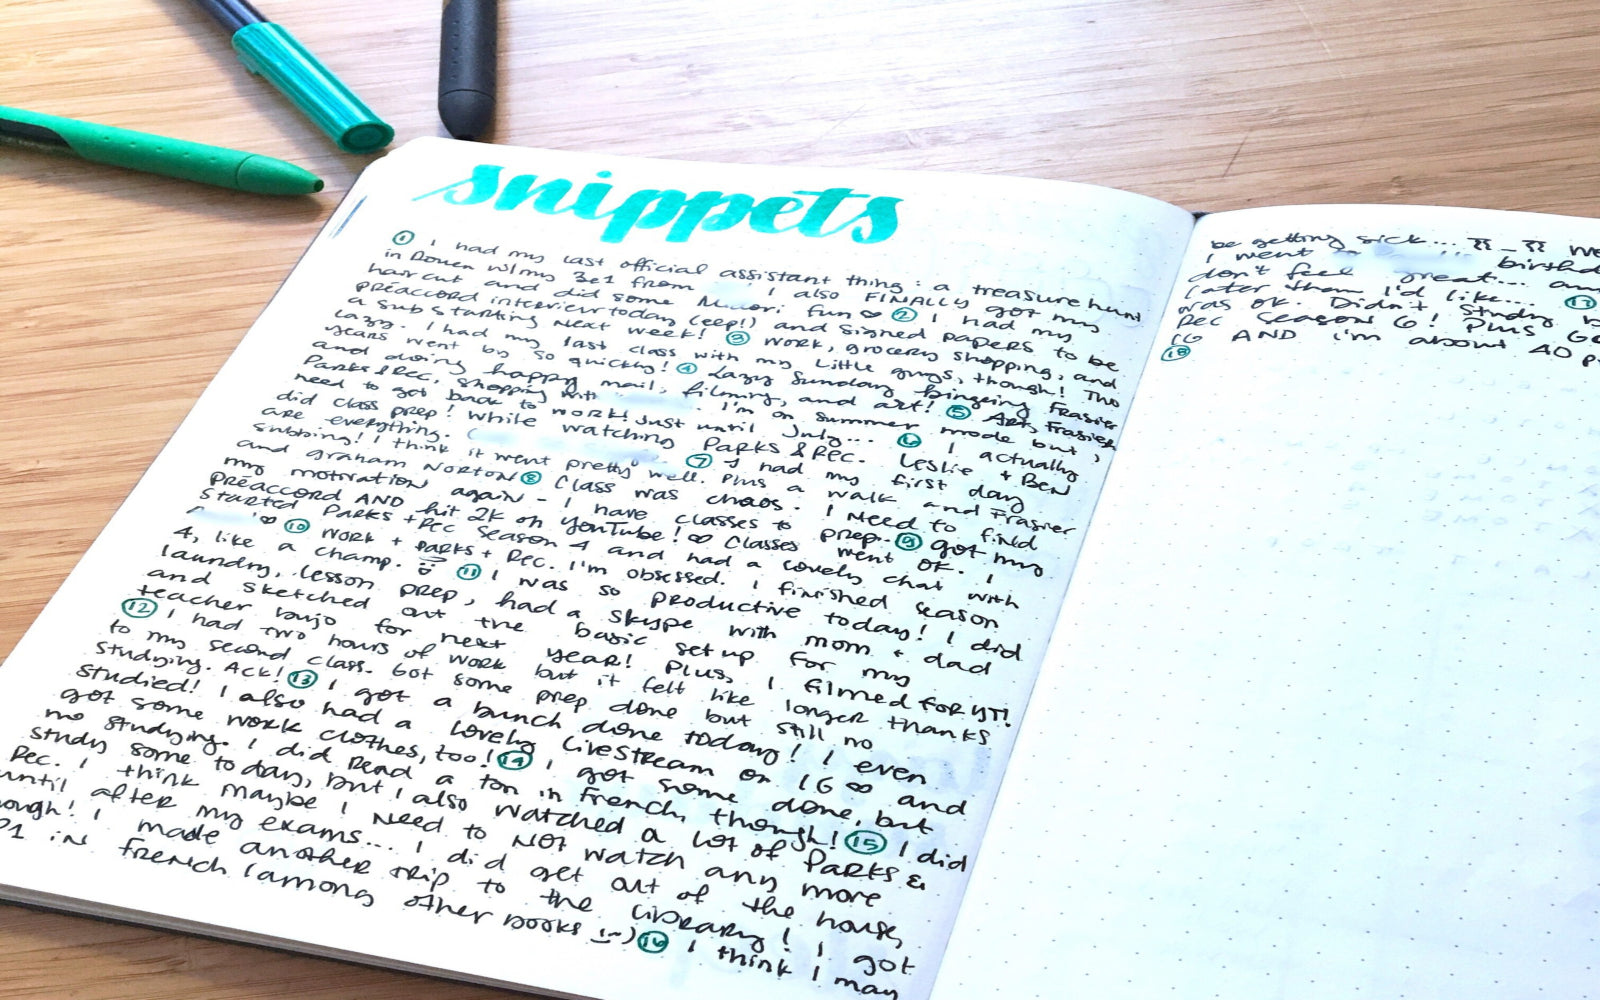 6 Wooden Stamp Tips That Enhance Your Creative Journal Spreads